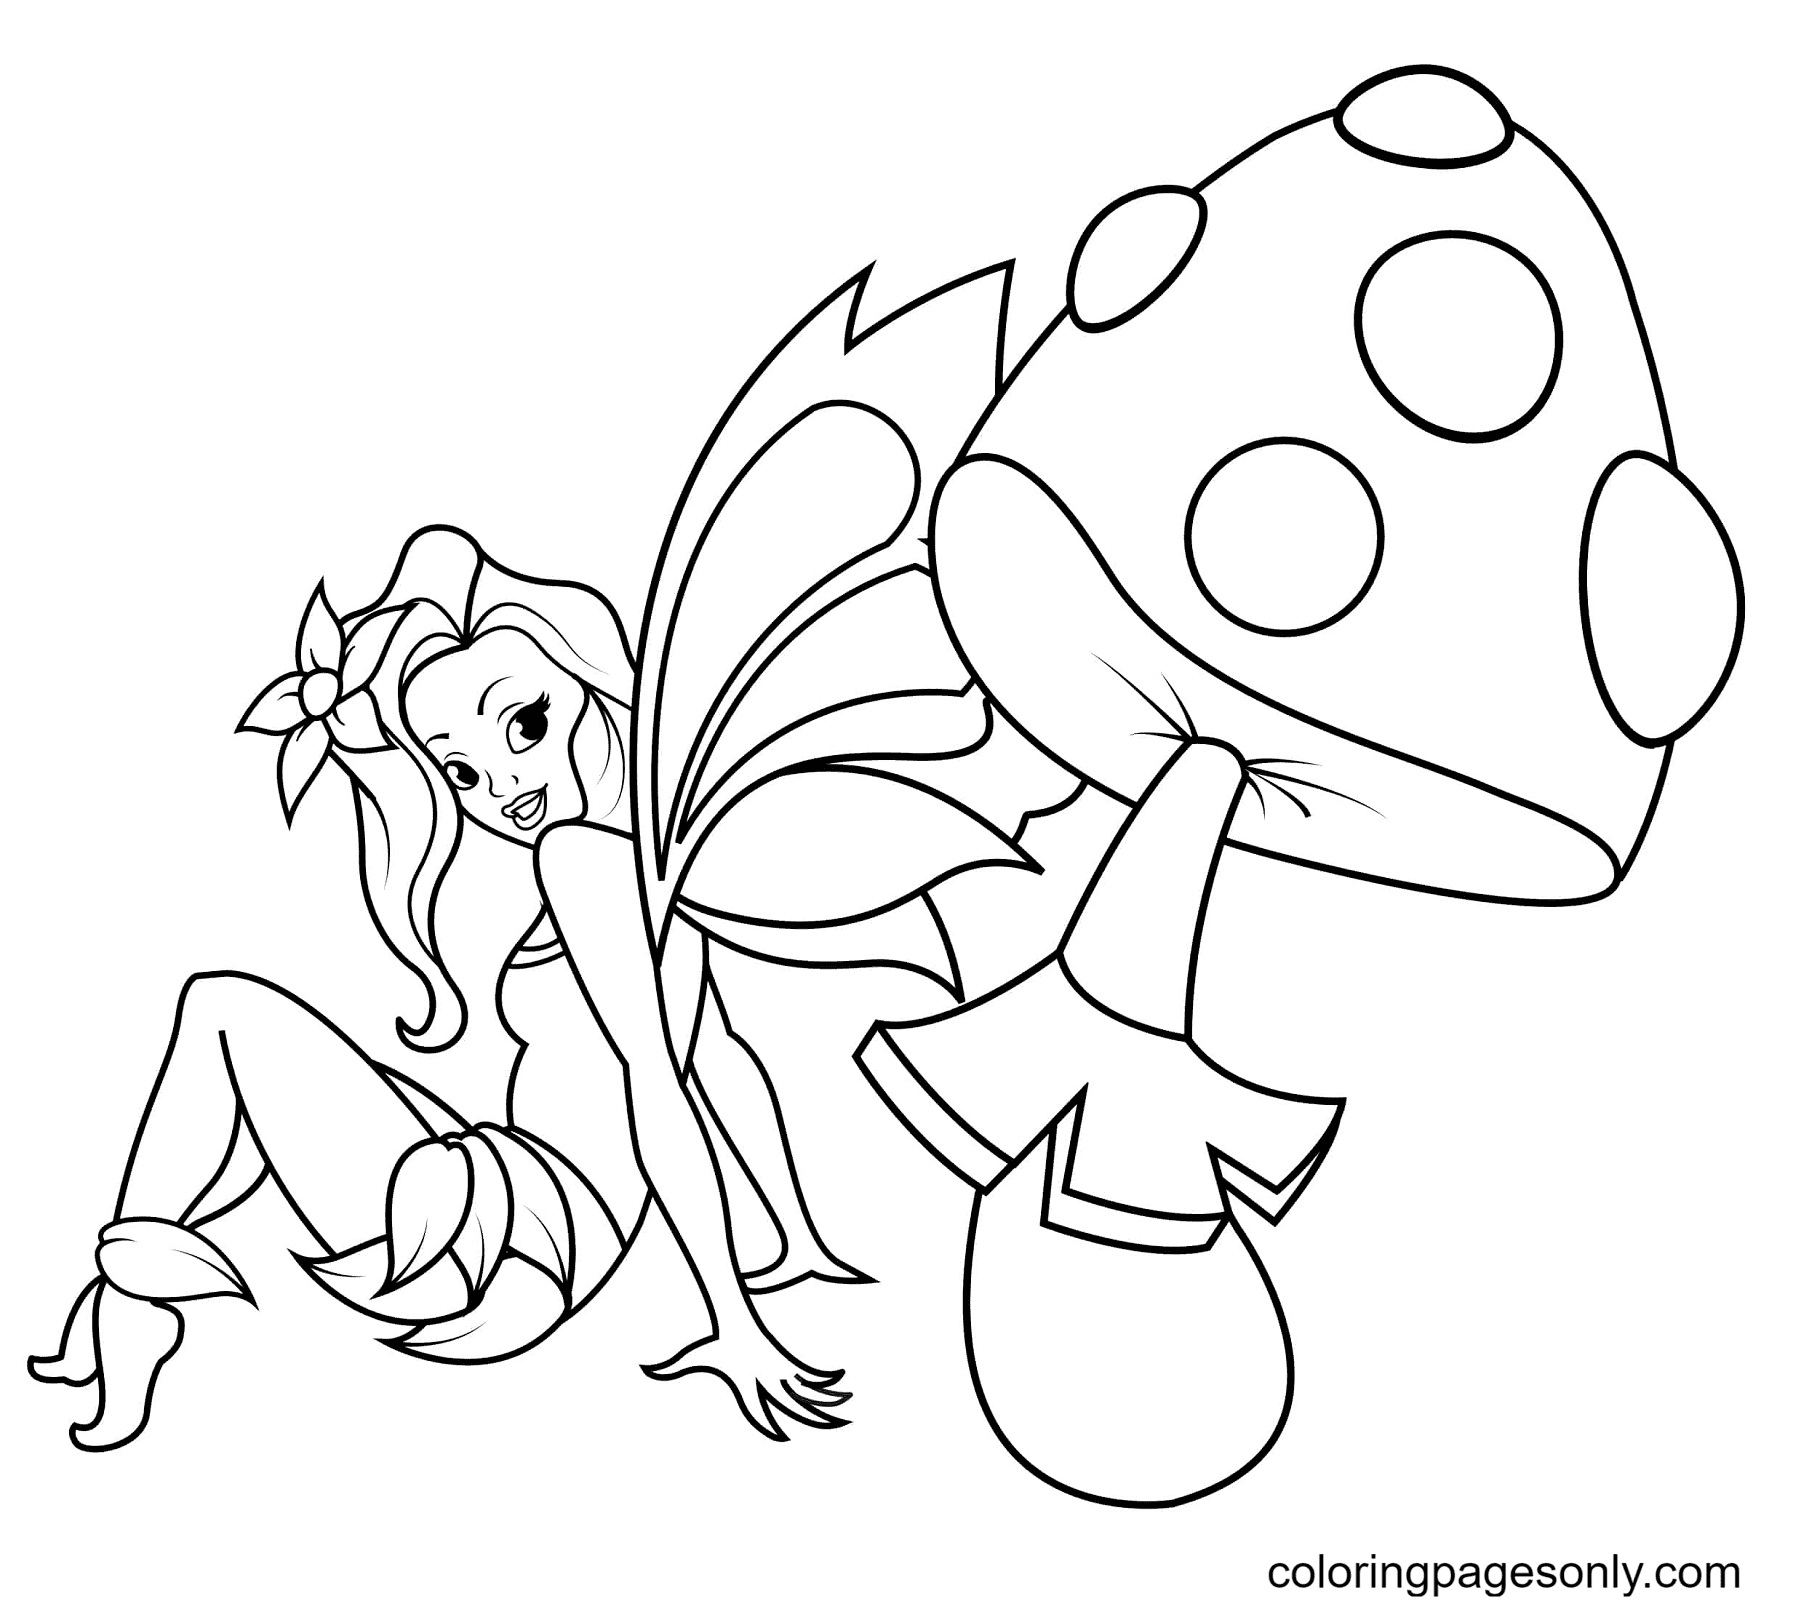 Fairy Sitting Under Mushroom Coloring Page